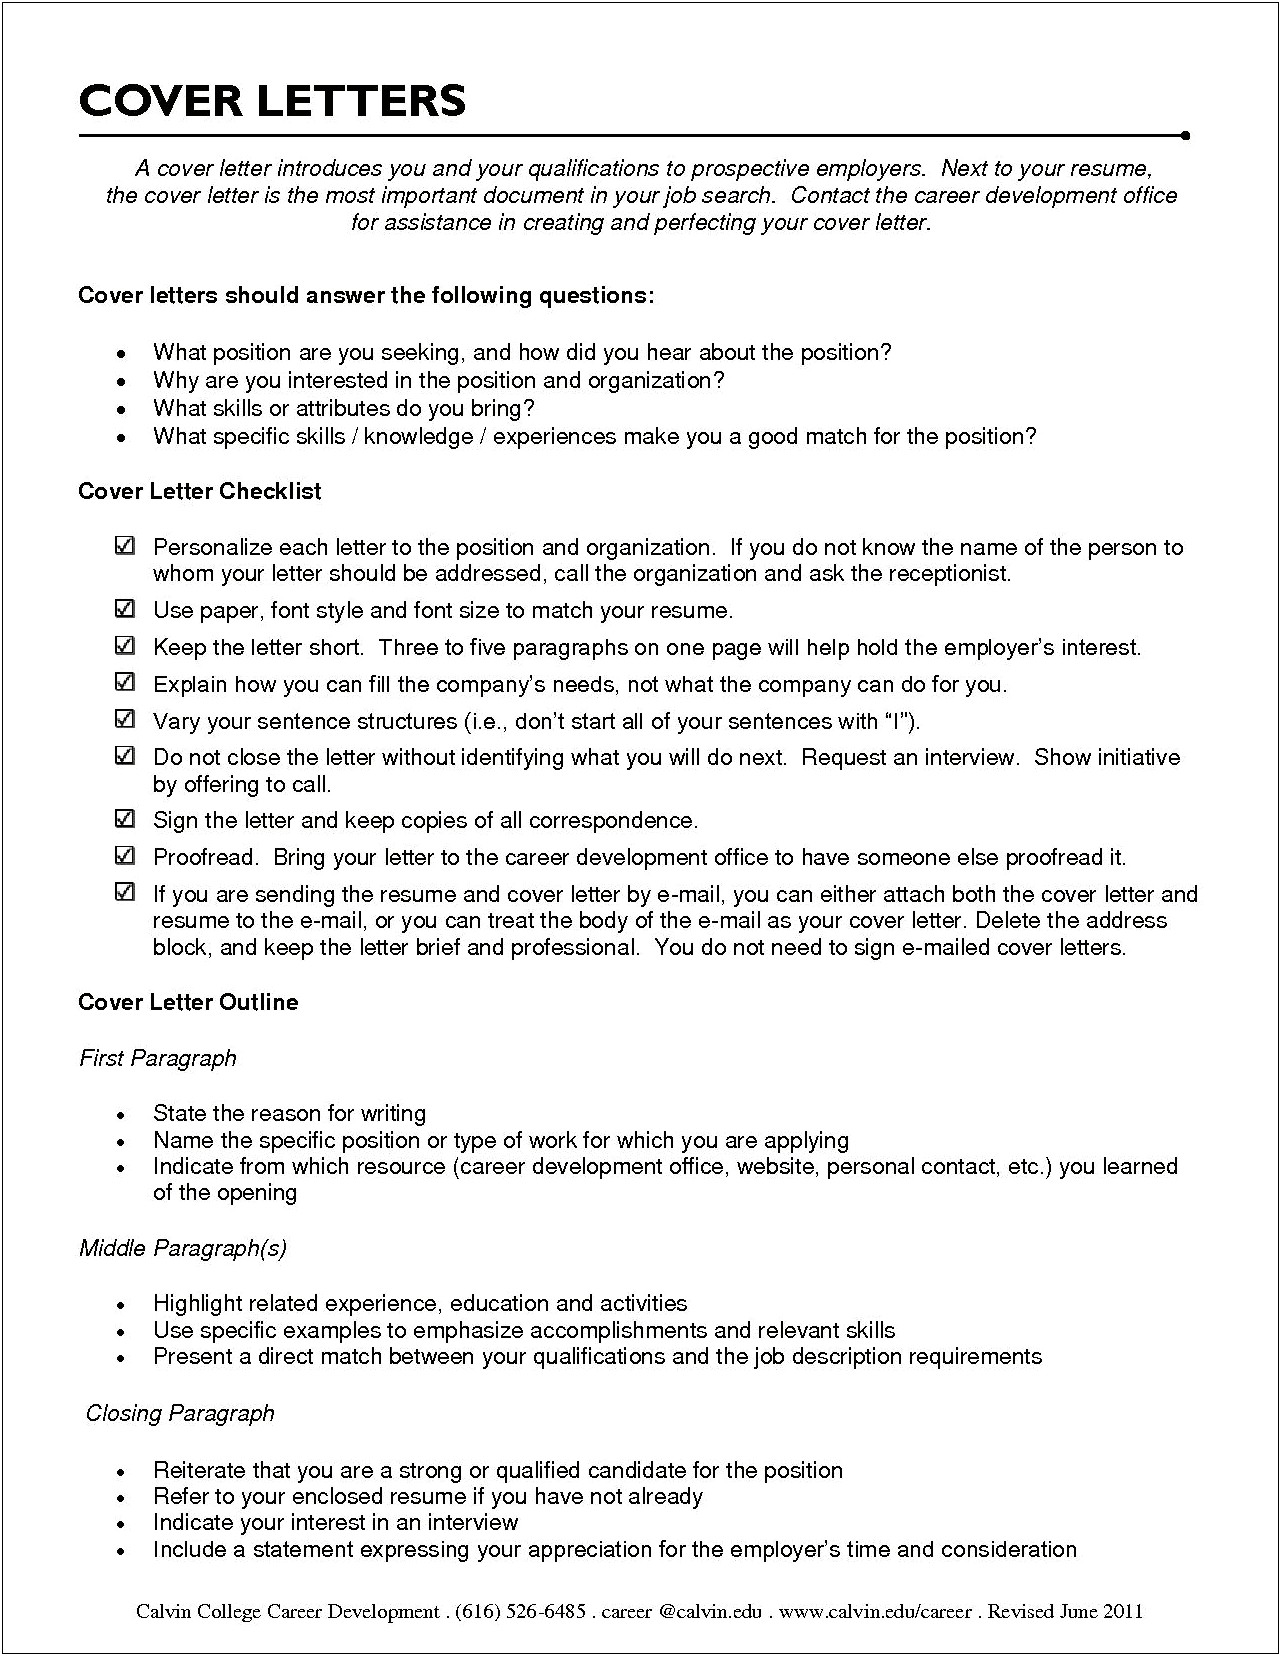 Sample Of Mental Health Counselor Resume